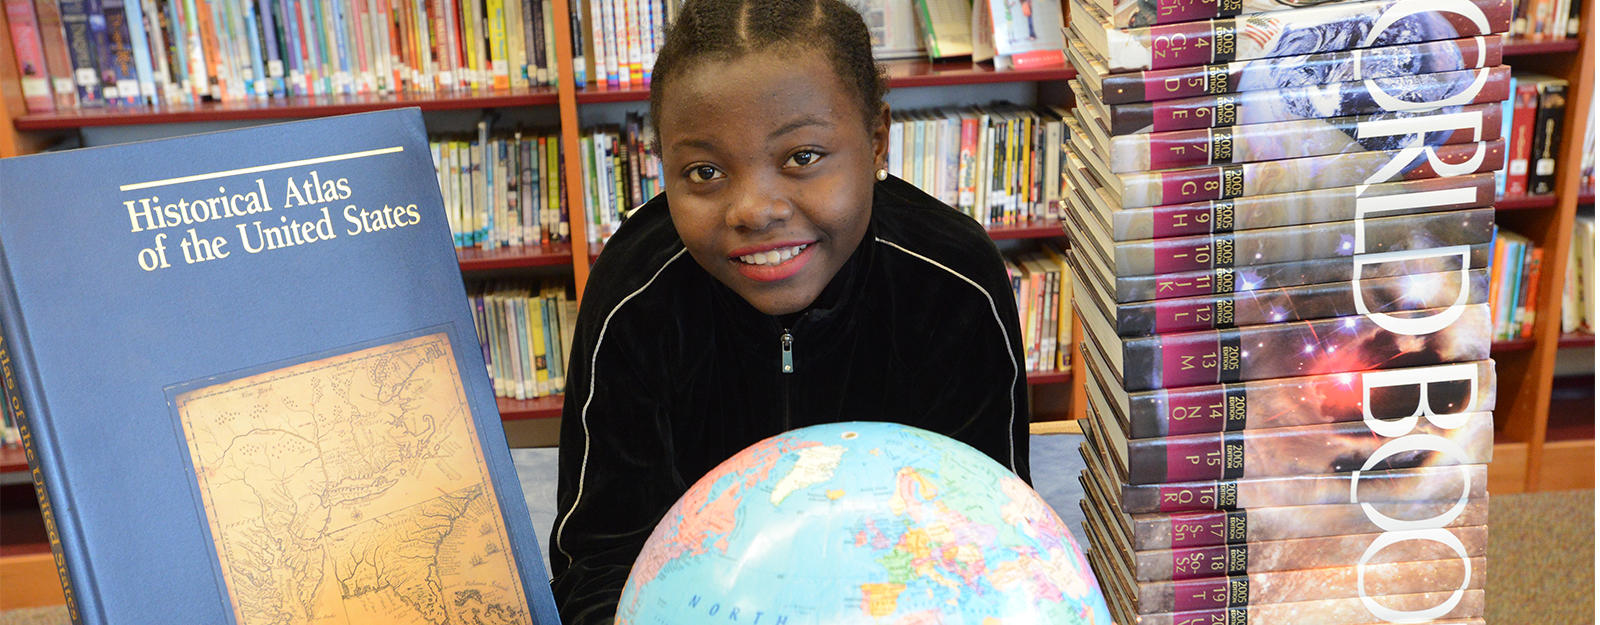 Student smiling behind a globe and stack of history textbooks.